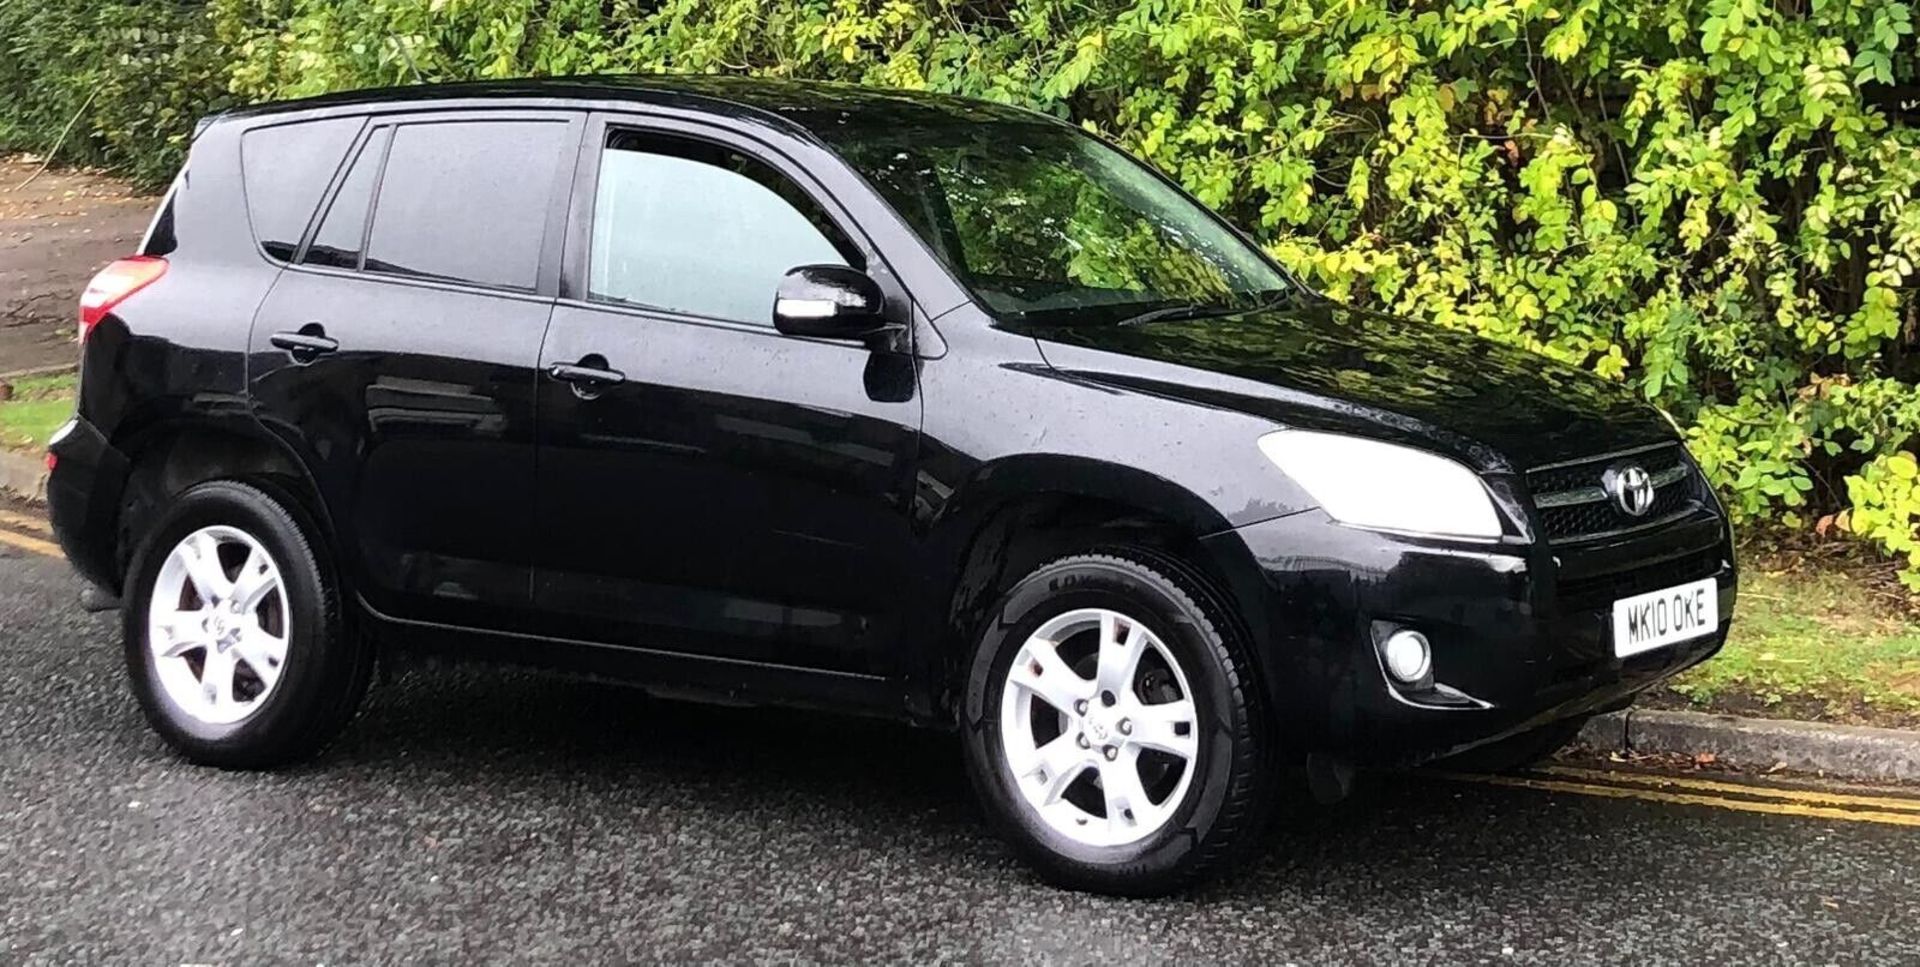 RELIABLE TOYOTA RAV4 2.2 D-4D XT-R: WELL-MAINTAINED 2010 MODEL - Image 6 of 14